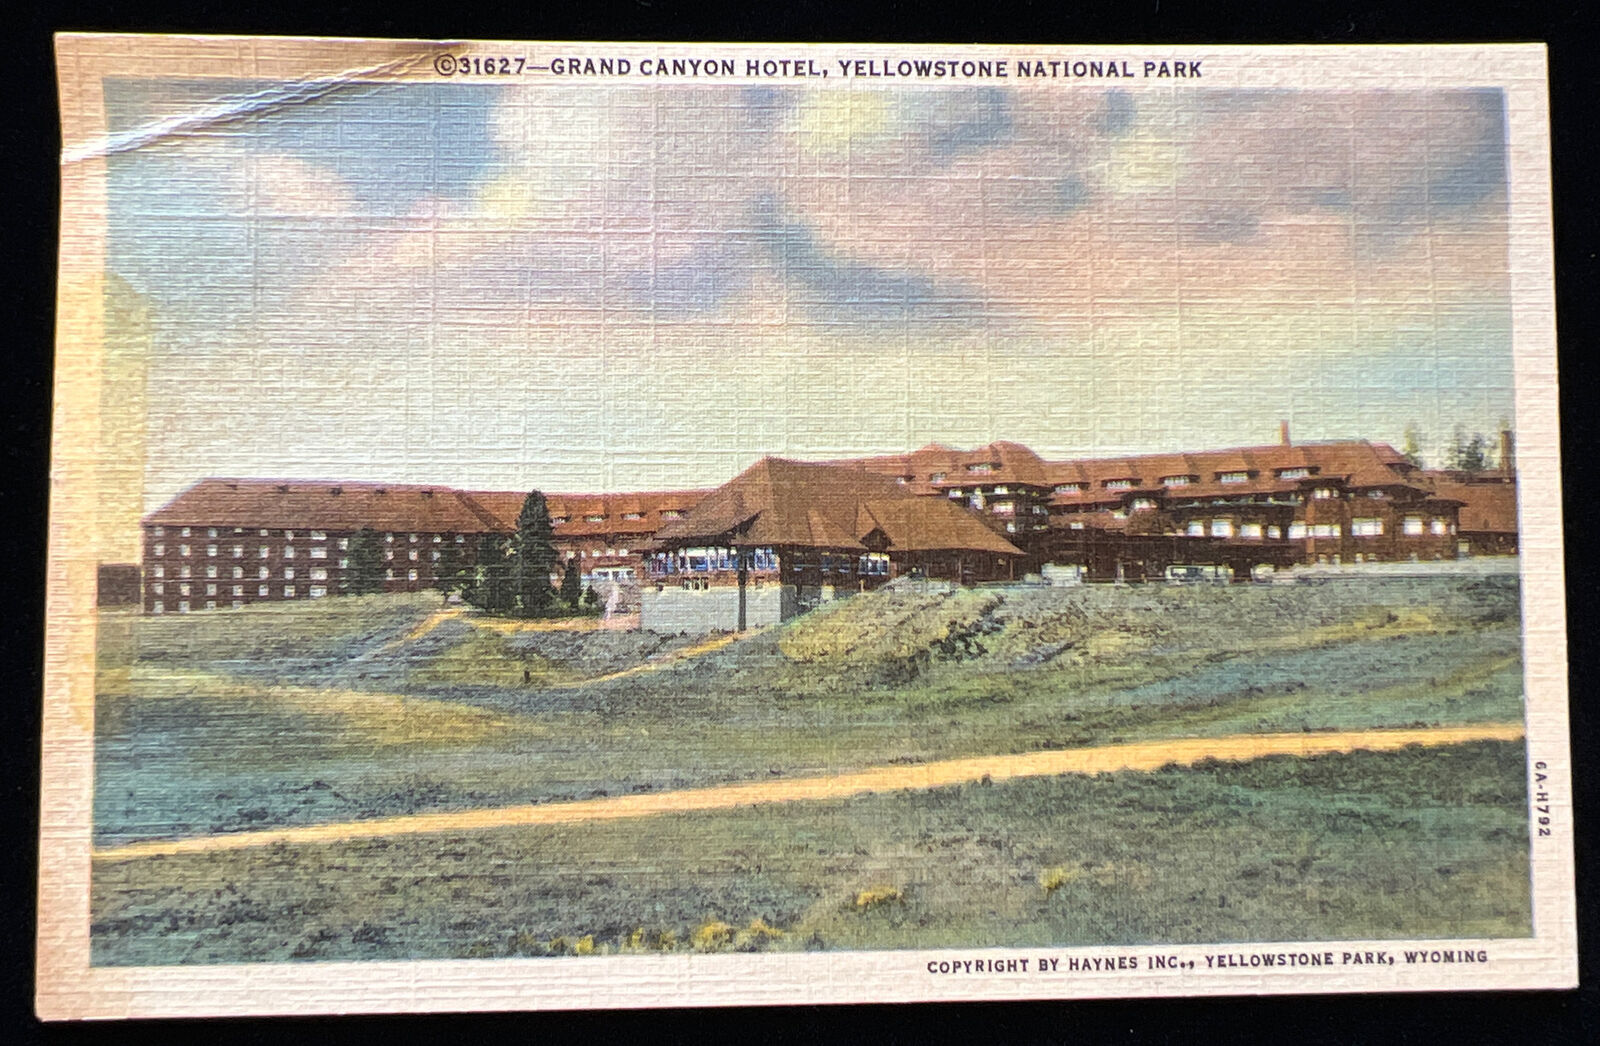 Vintage Grand Canyon Hotel Yellowstone National Park WY c1936 Linen Postcard